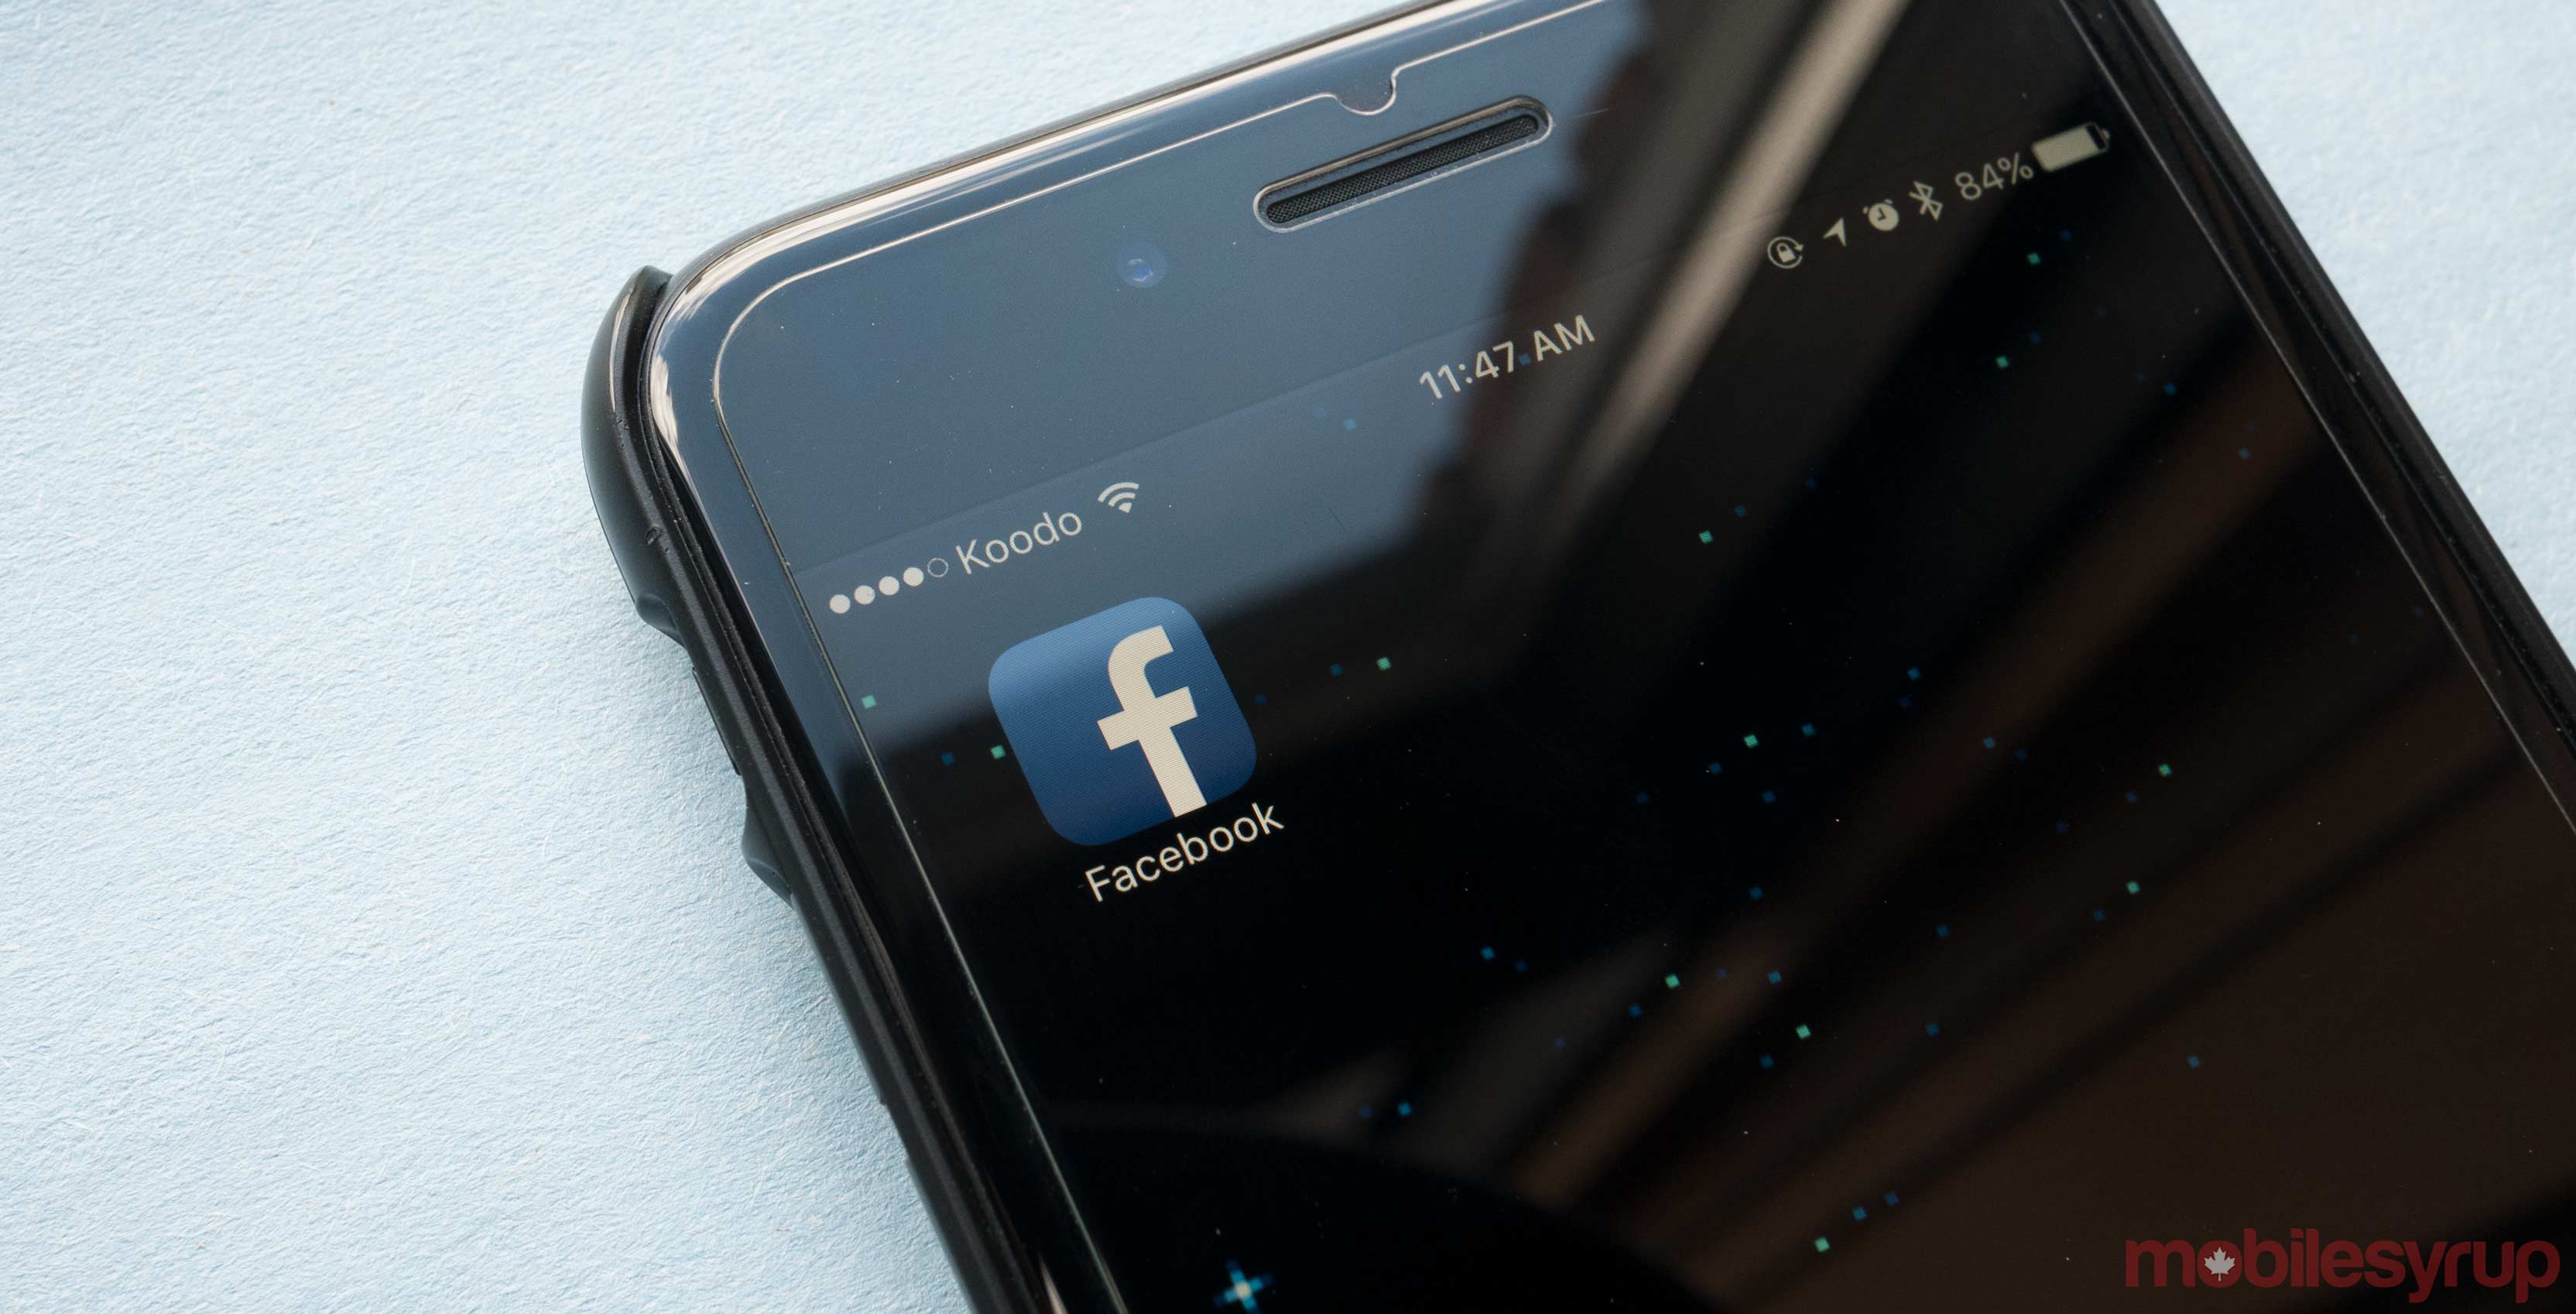 Facebook promises to boost account security following major hack if lawsuit is settled